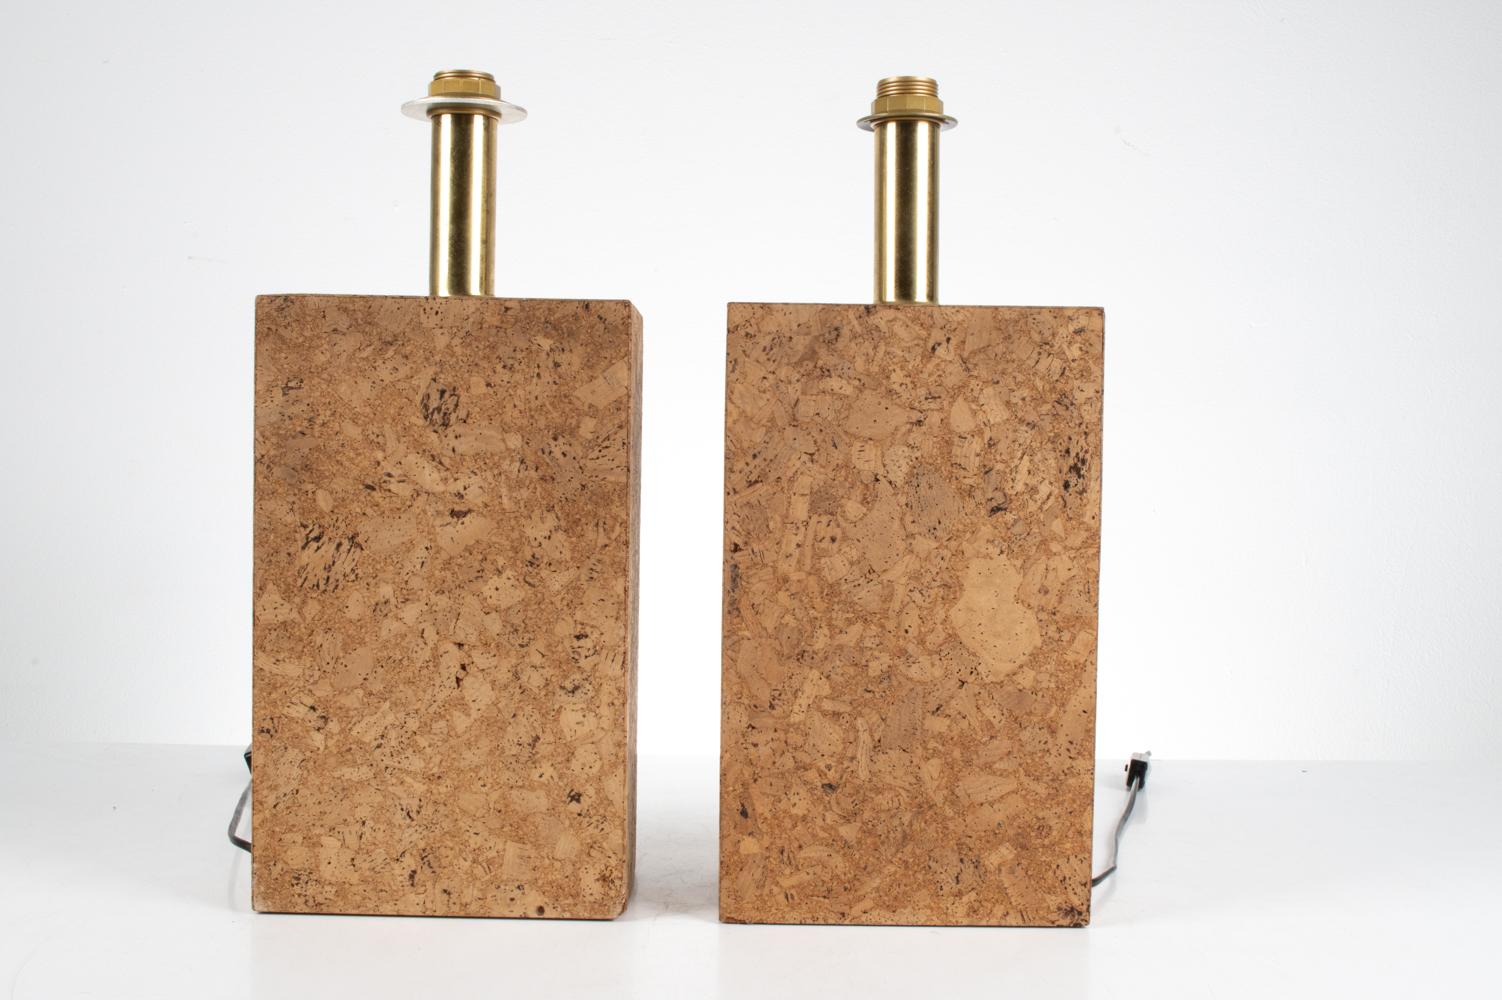 Pair of Cork Monolith Table Lamps in the Stye of Ingo Maurer, c. 1970's In Good Condition For Sale In Norwalk, CT